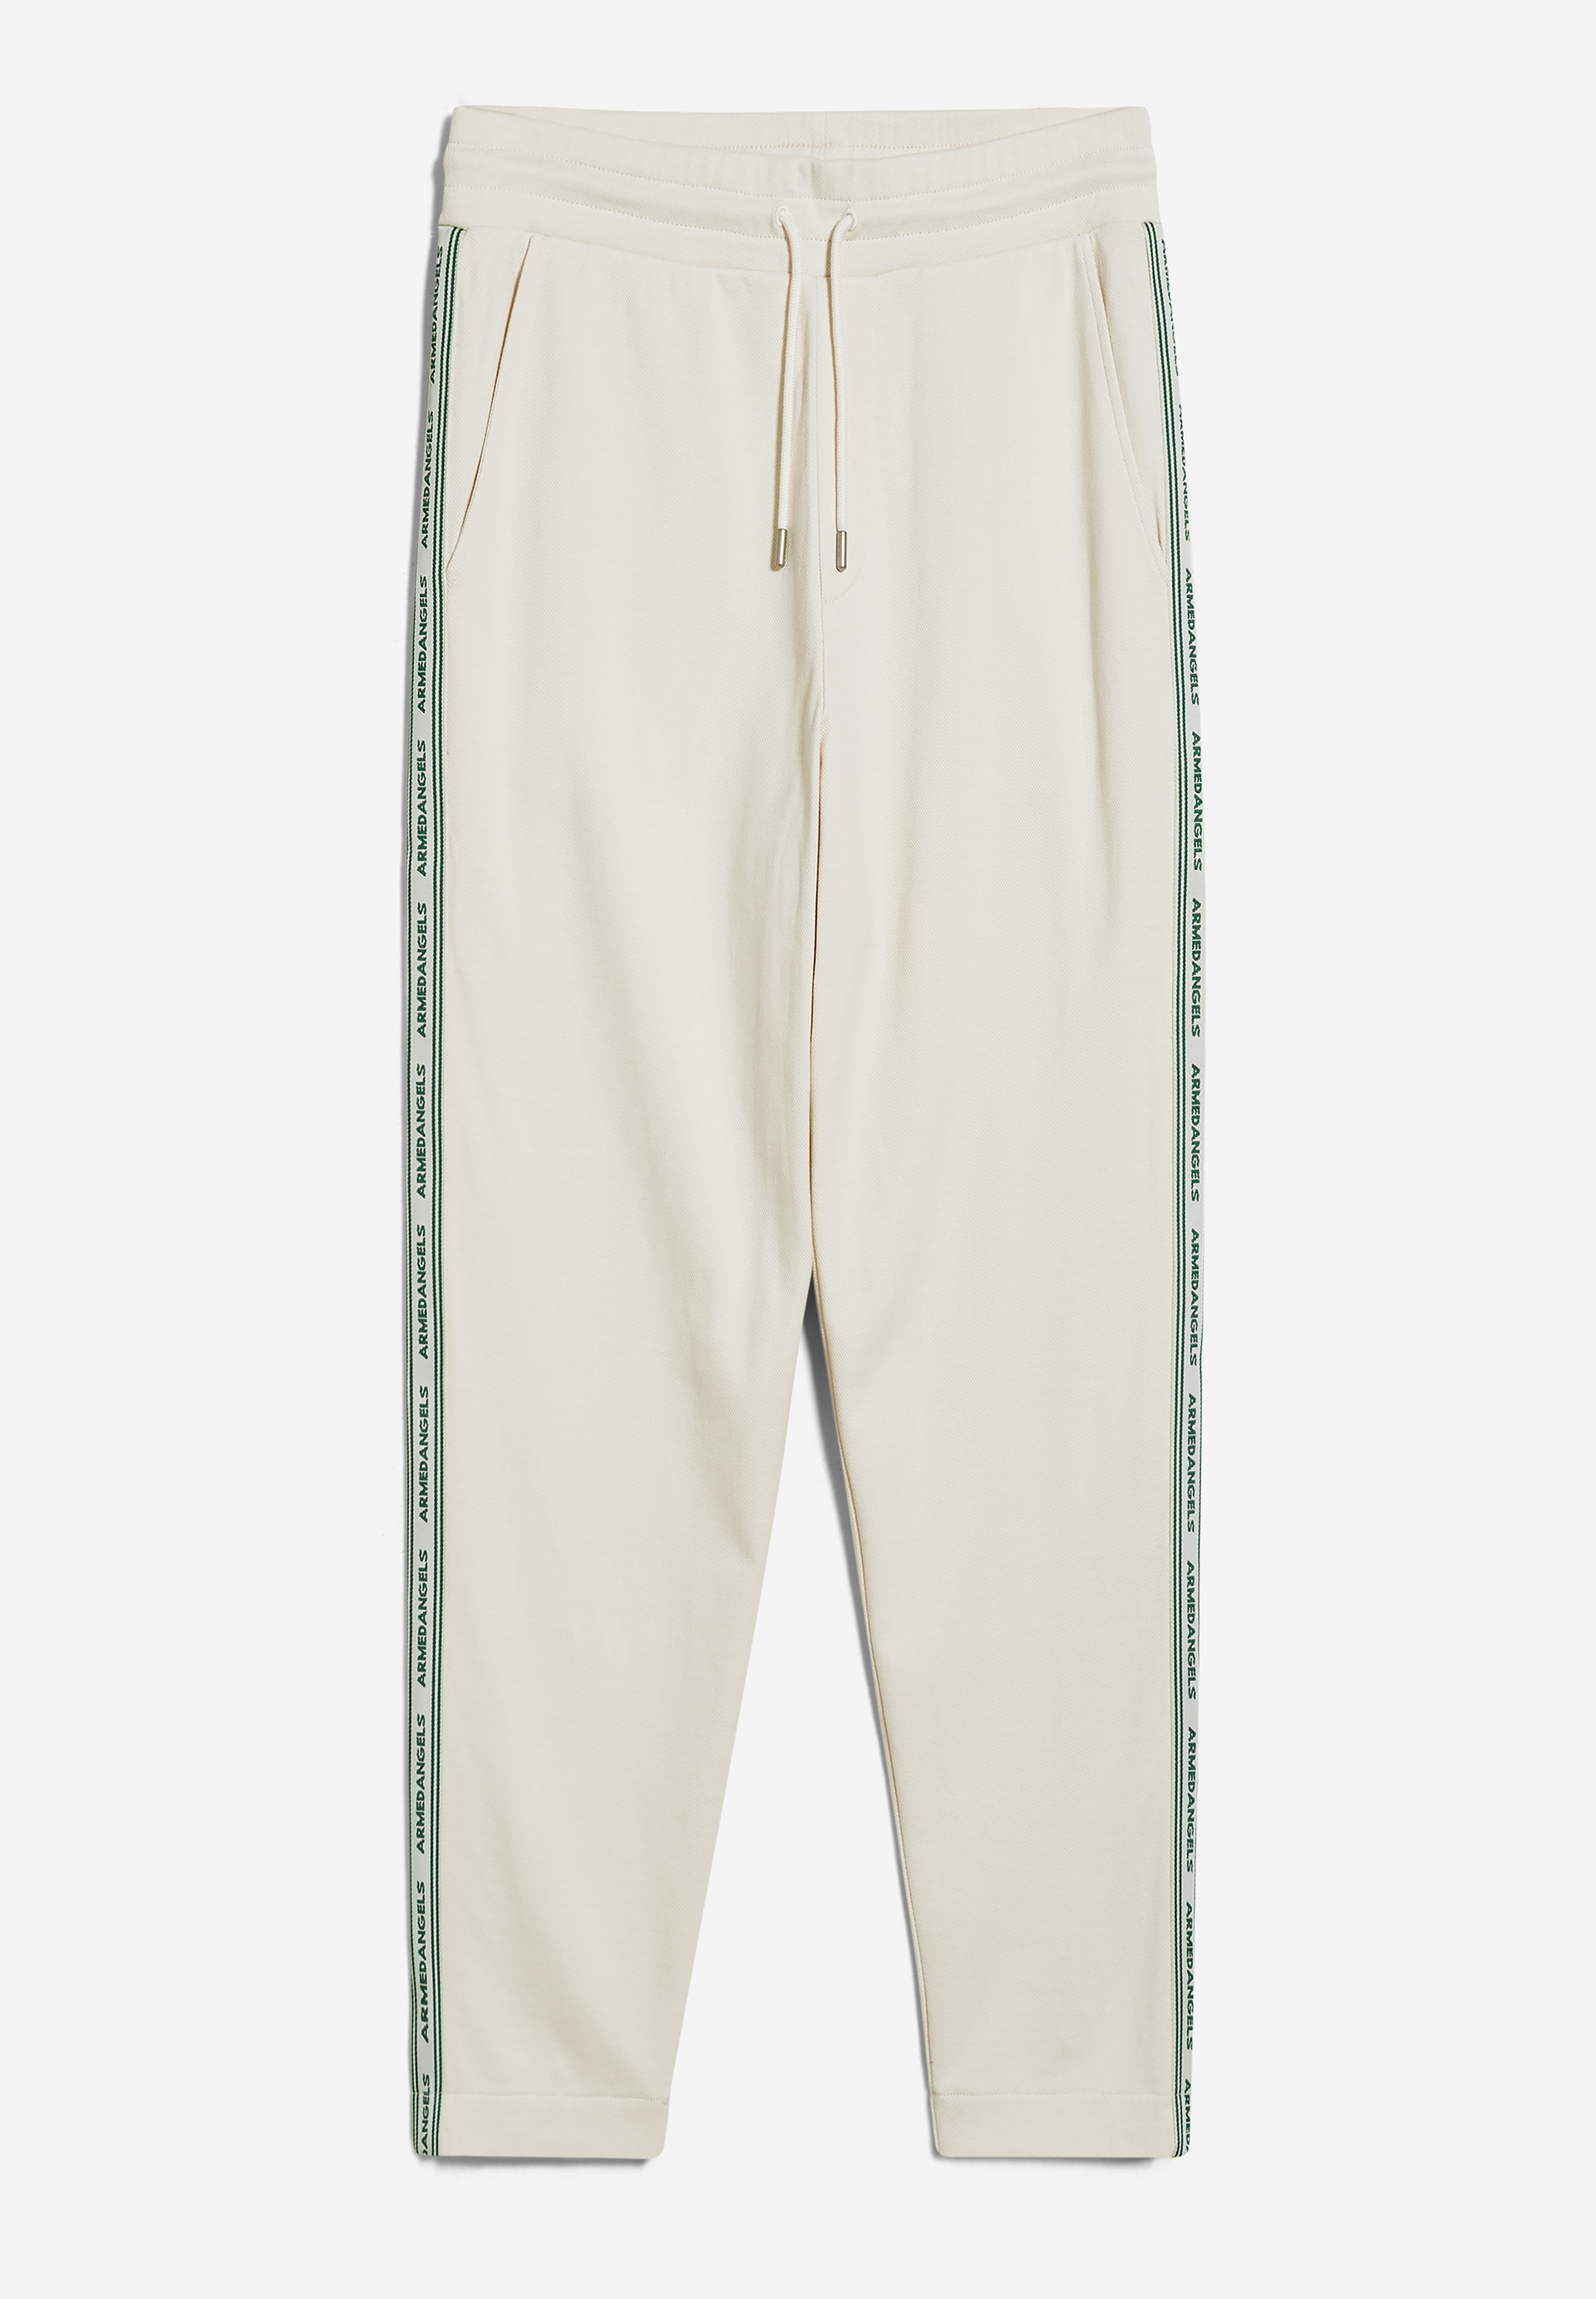 LAAKO Heavyweight Sweat Pants Relaxed Fit made of Organic Cotton Mix